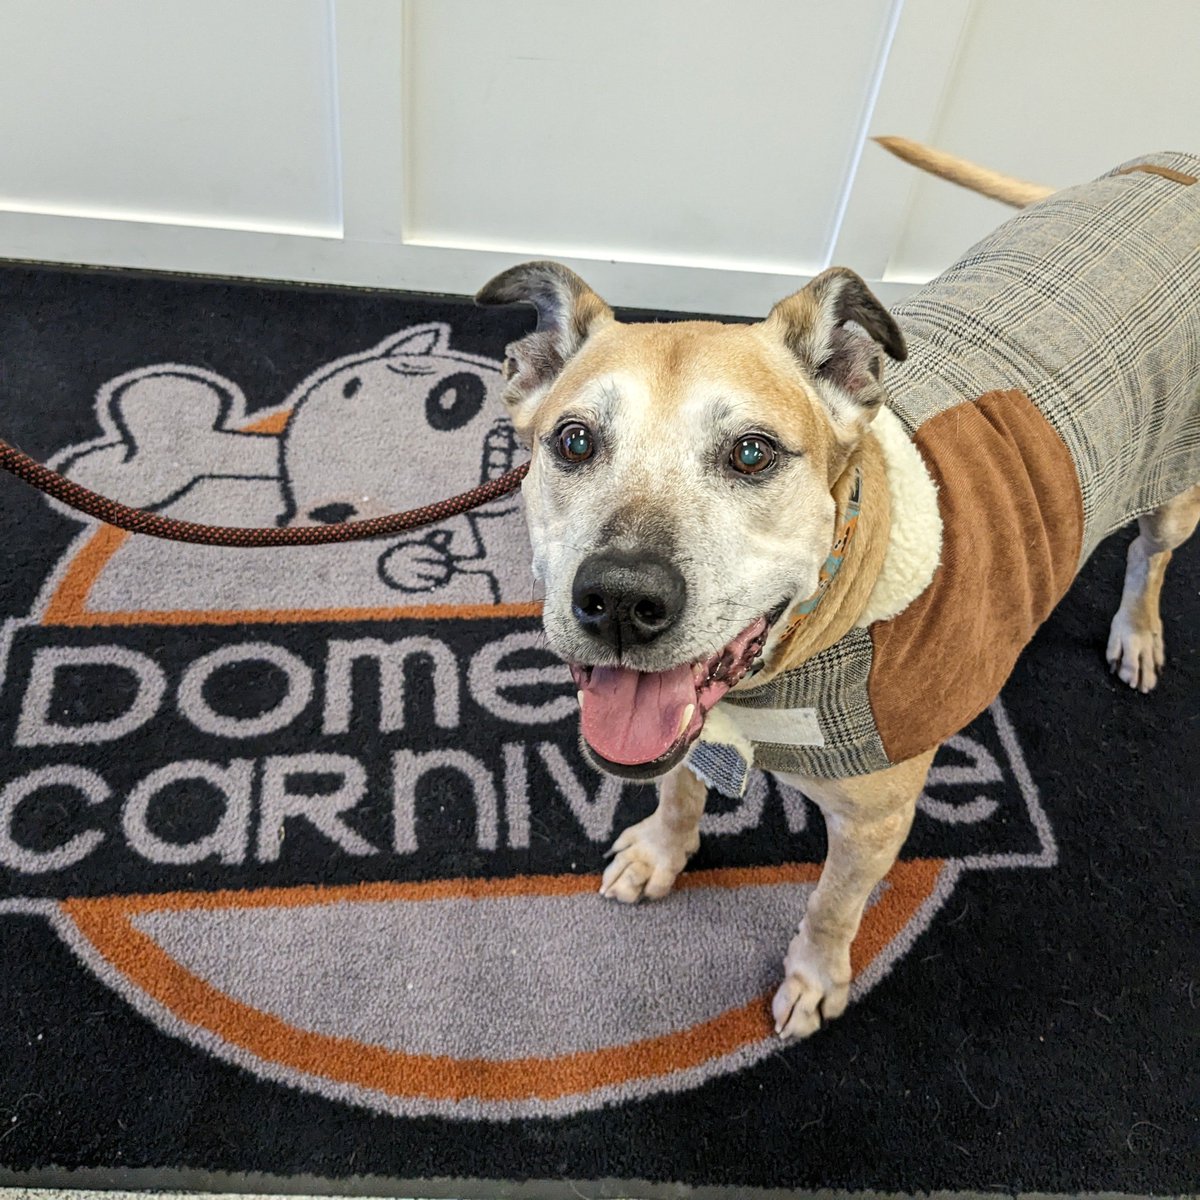 Mr.Russell came by in his fancy tweed jacket to check out the store and see where his Mom gets all his food! 
#rescuedog #rawfed #rawfeeding #speciesappropriatediet #hamont #ancaster #shoplocal #dogsofdomesticcarnivore #dogallergies #allergyrelief